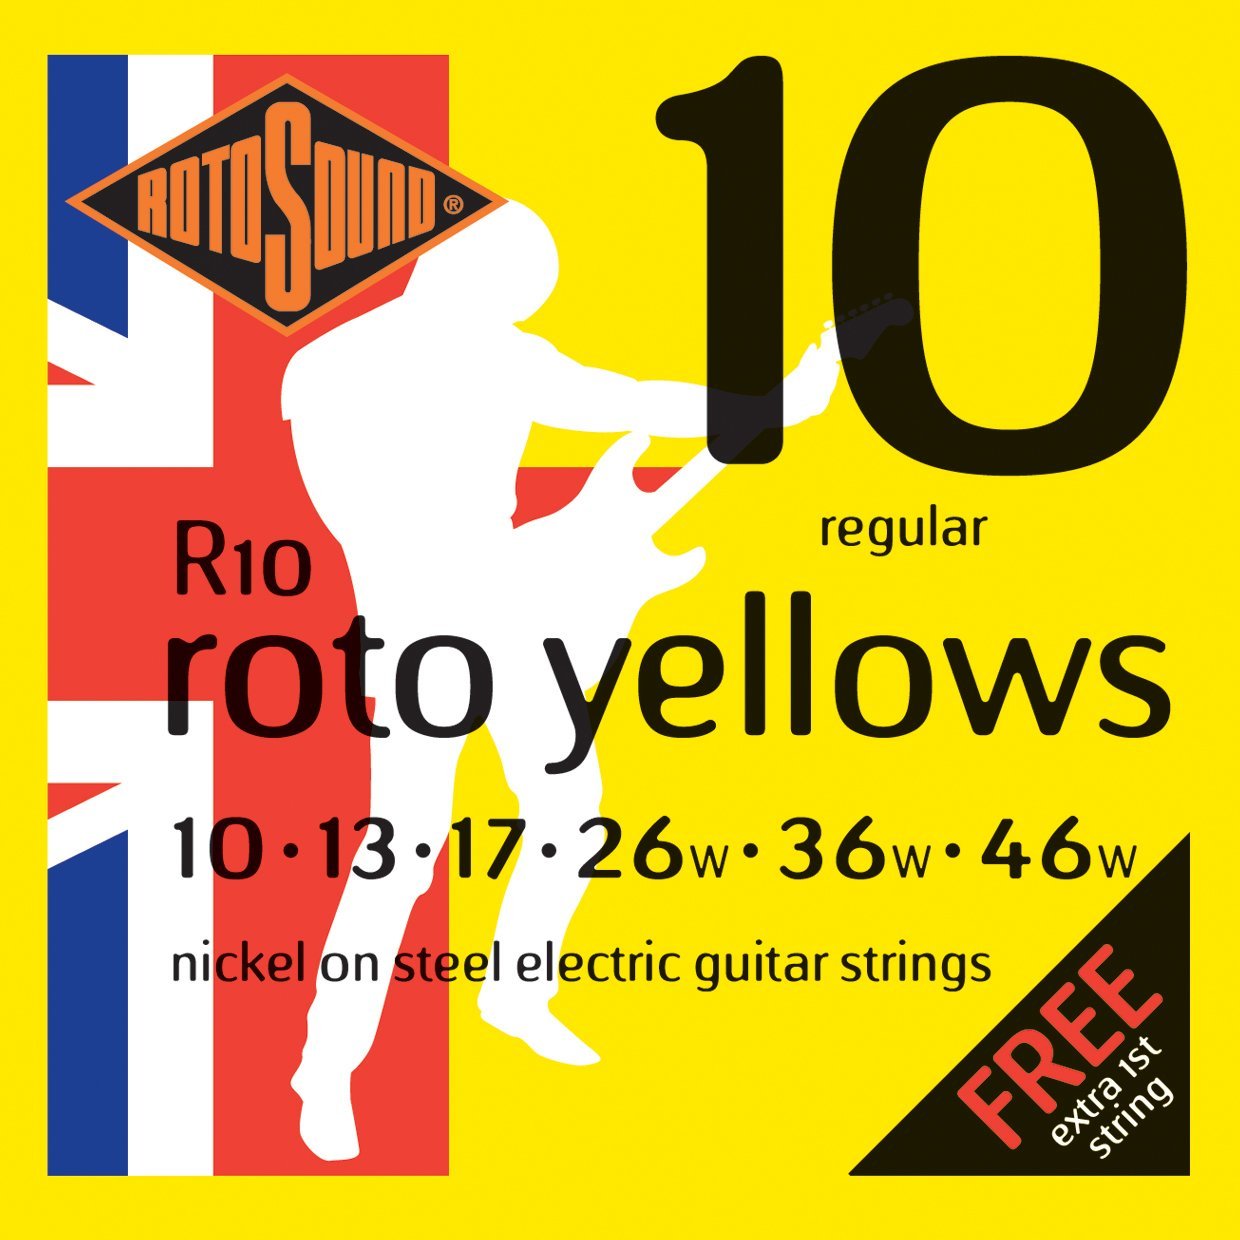 Rotosound R10 Roto Yellows Electric Guitar Strings - 10-46